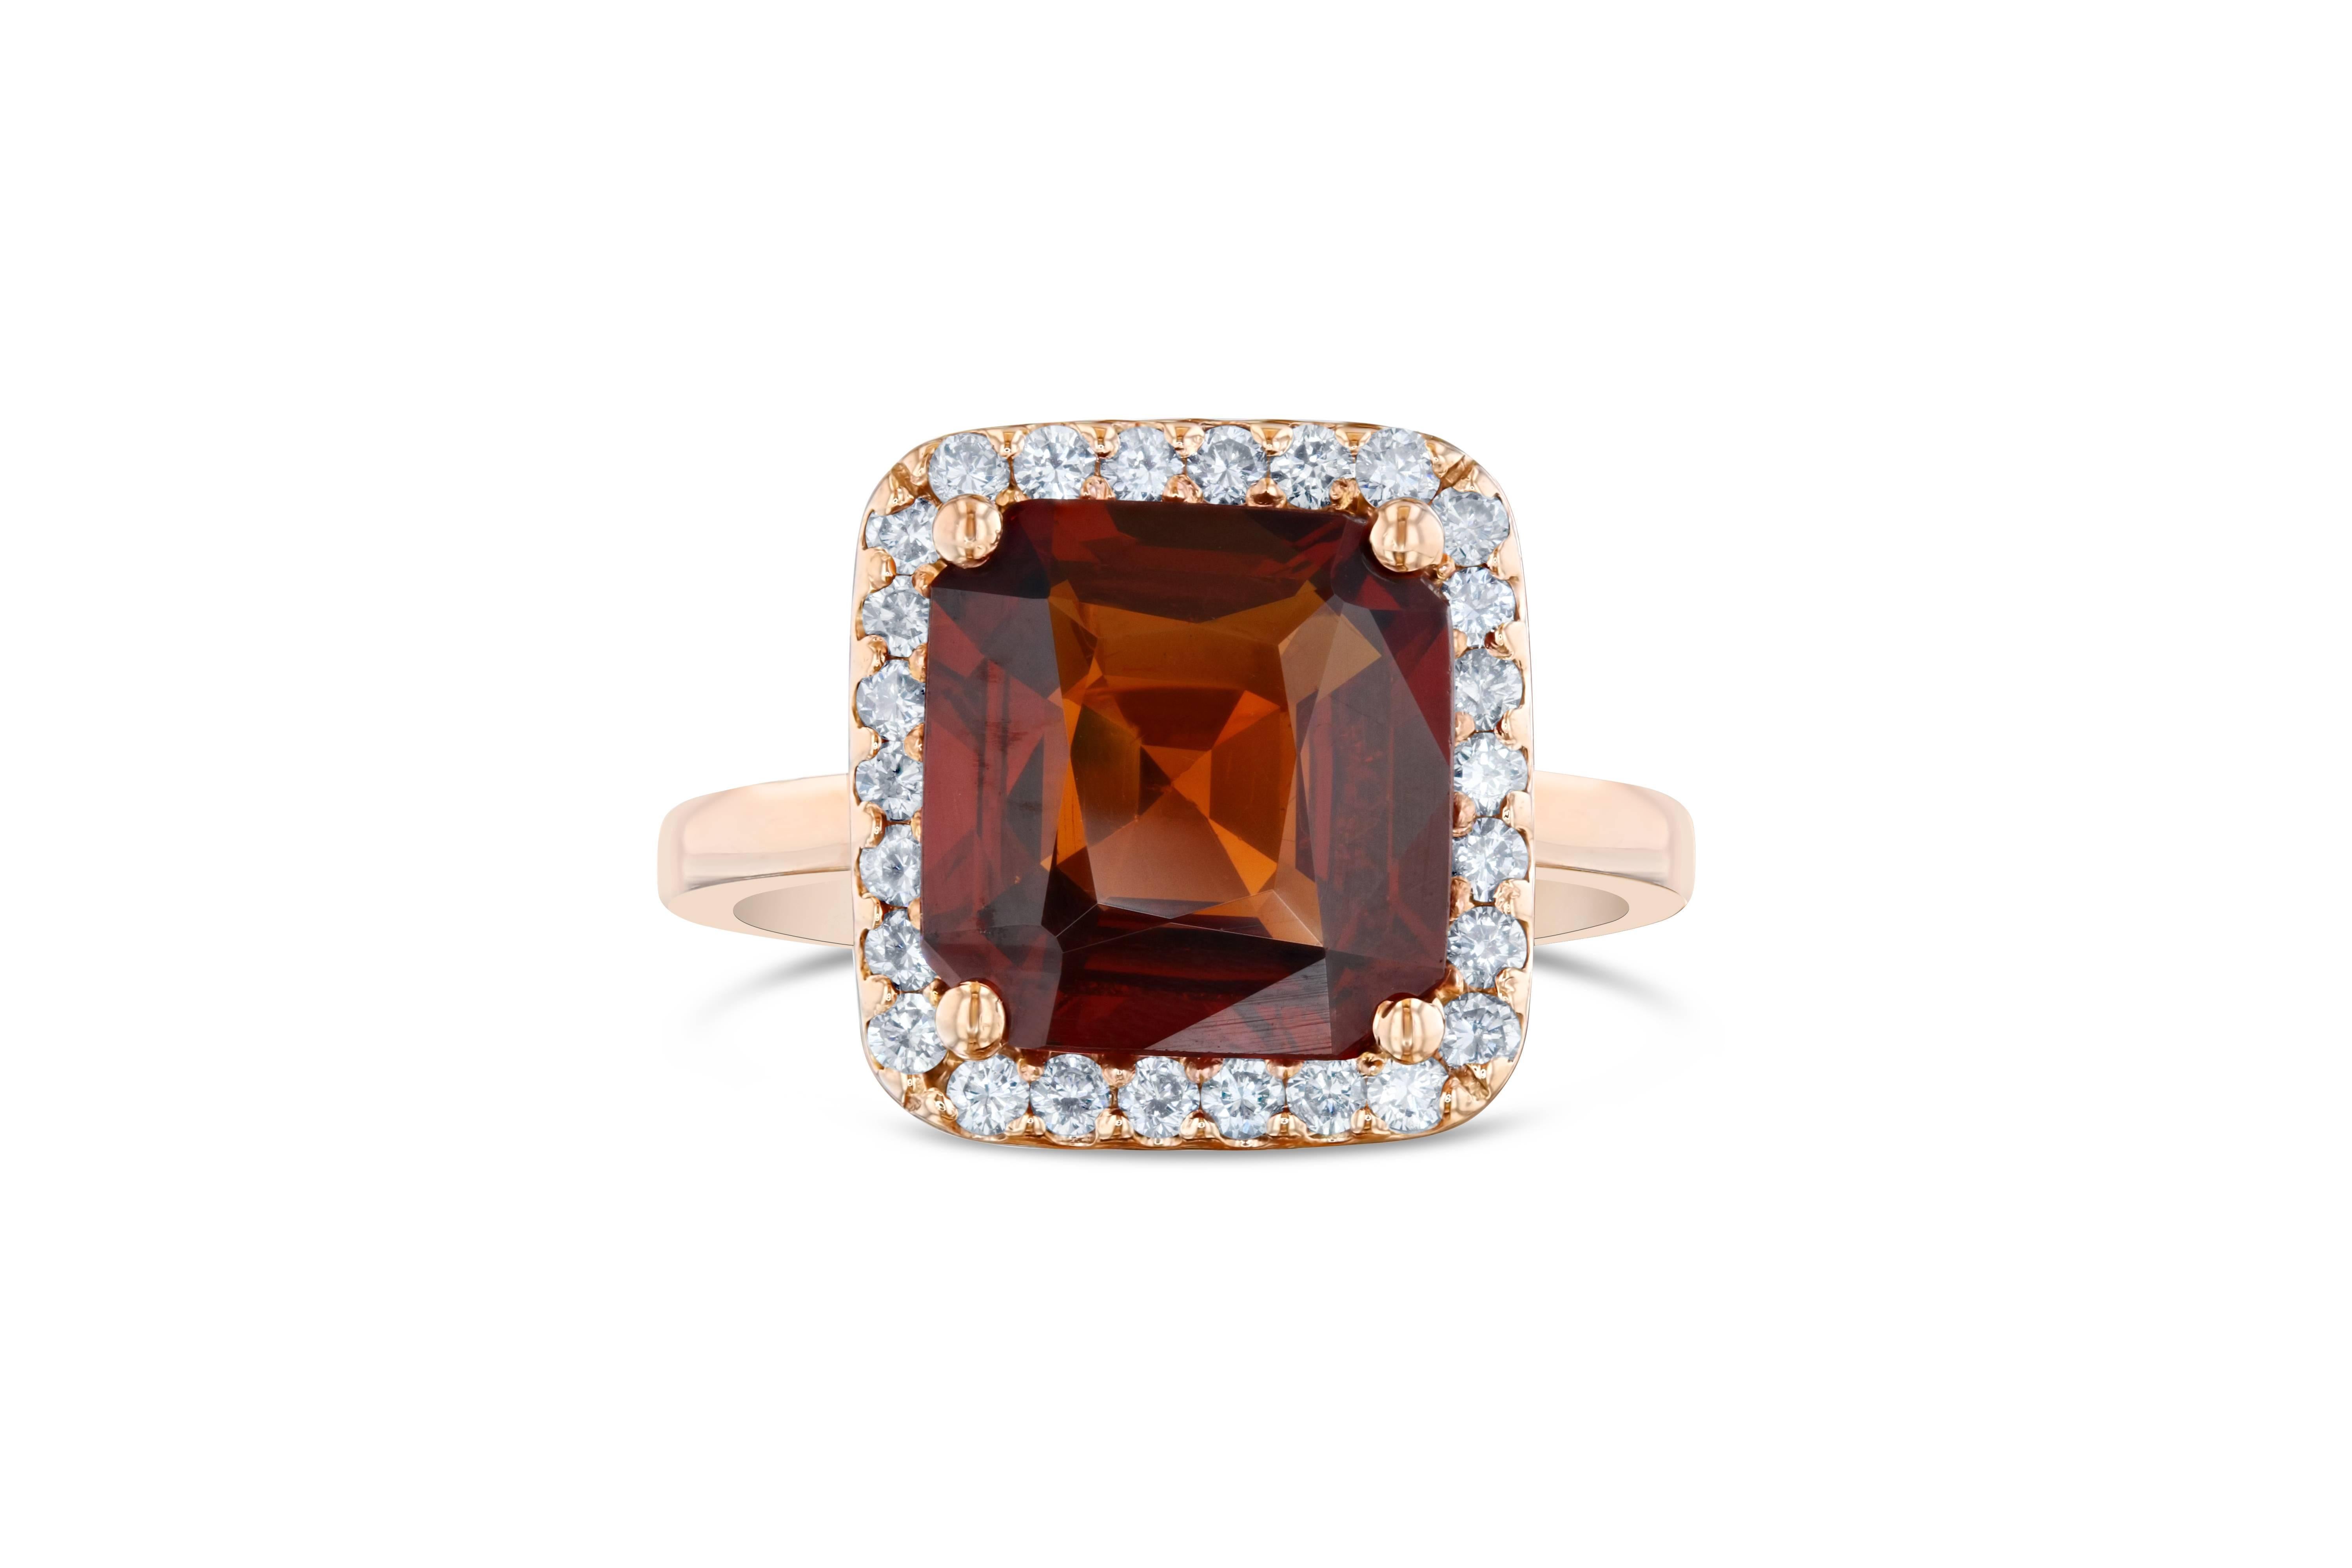 This beautiful ring has a 5.18 carat Square Cut Spessartine Garnet. Spessartines are natural gemstones within the Garnet Family. The ring is surrounded by a halo of 26 Round Cut Diamonds that weigh 0.42 carat. The total carat weight of the ring is